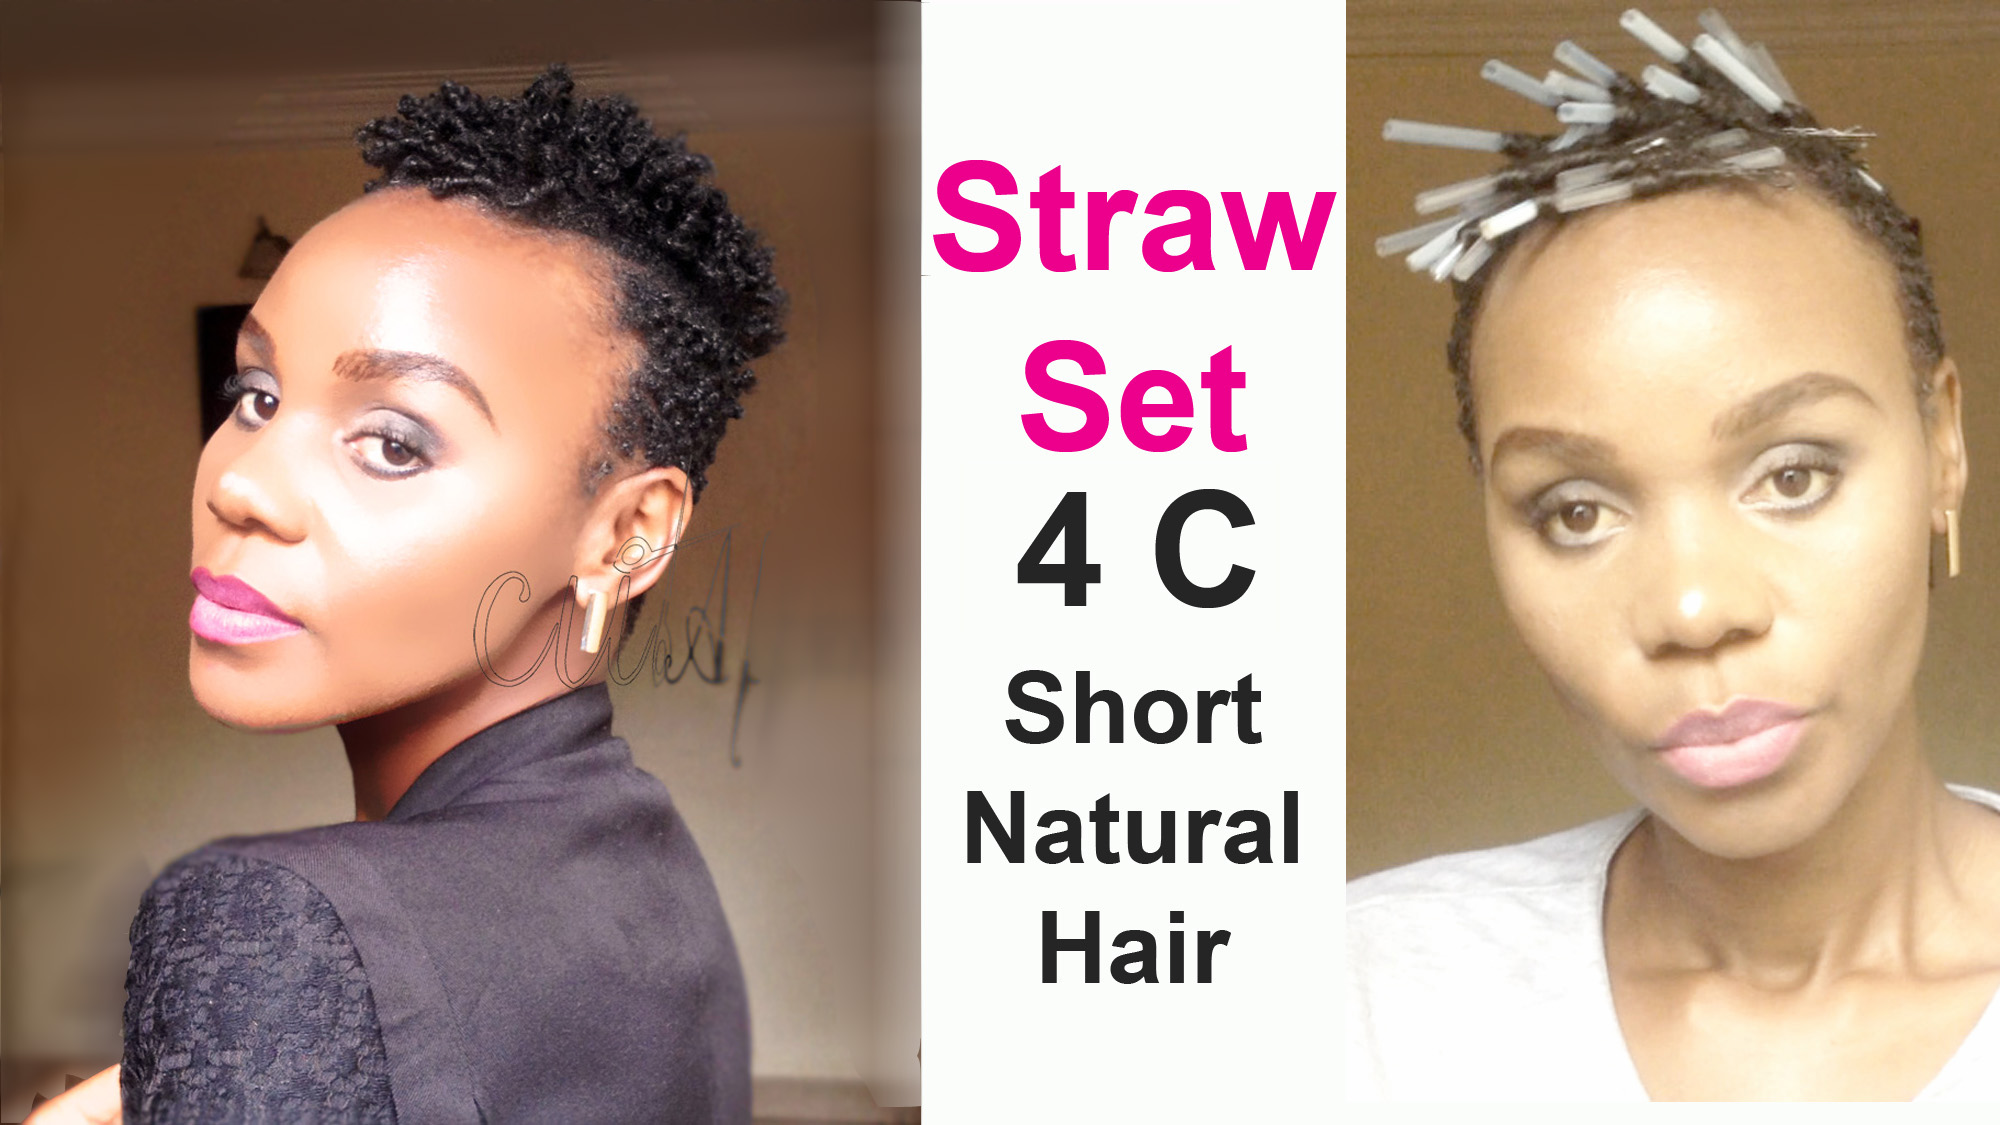 How To Straw Set on Short Natural Hair